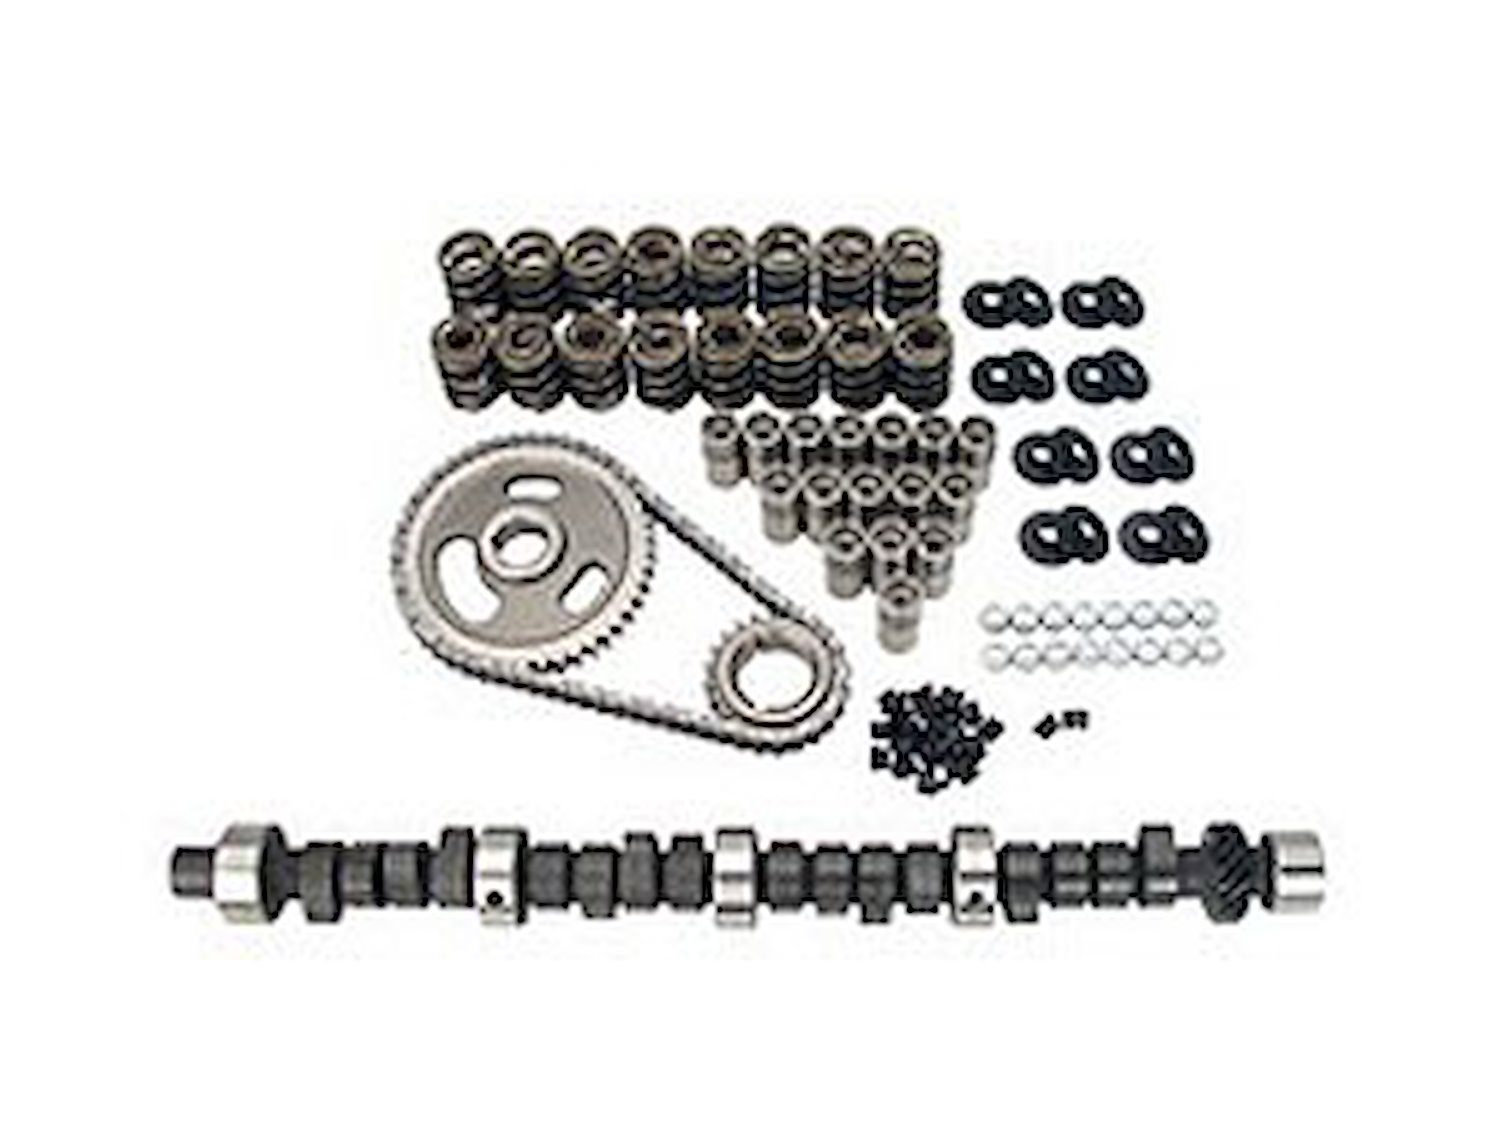 Xtreme Energy 256H Hydraulic Flat Tappet Camshaft Complete Kit Lift: .477"/.484" Duration: 256°/268° RPM Range: 1200-5200